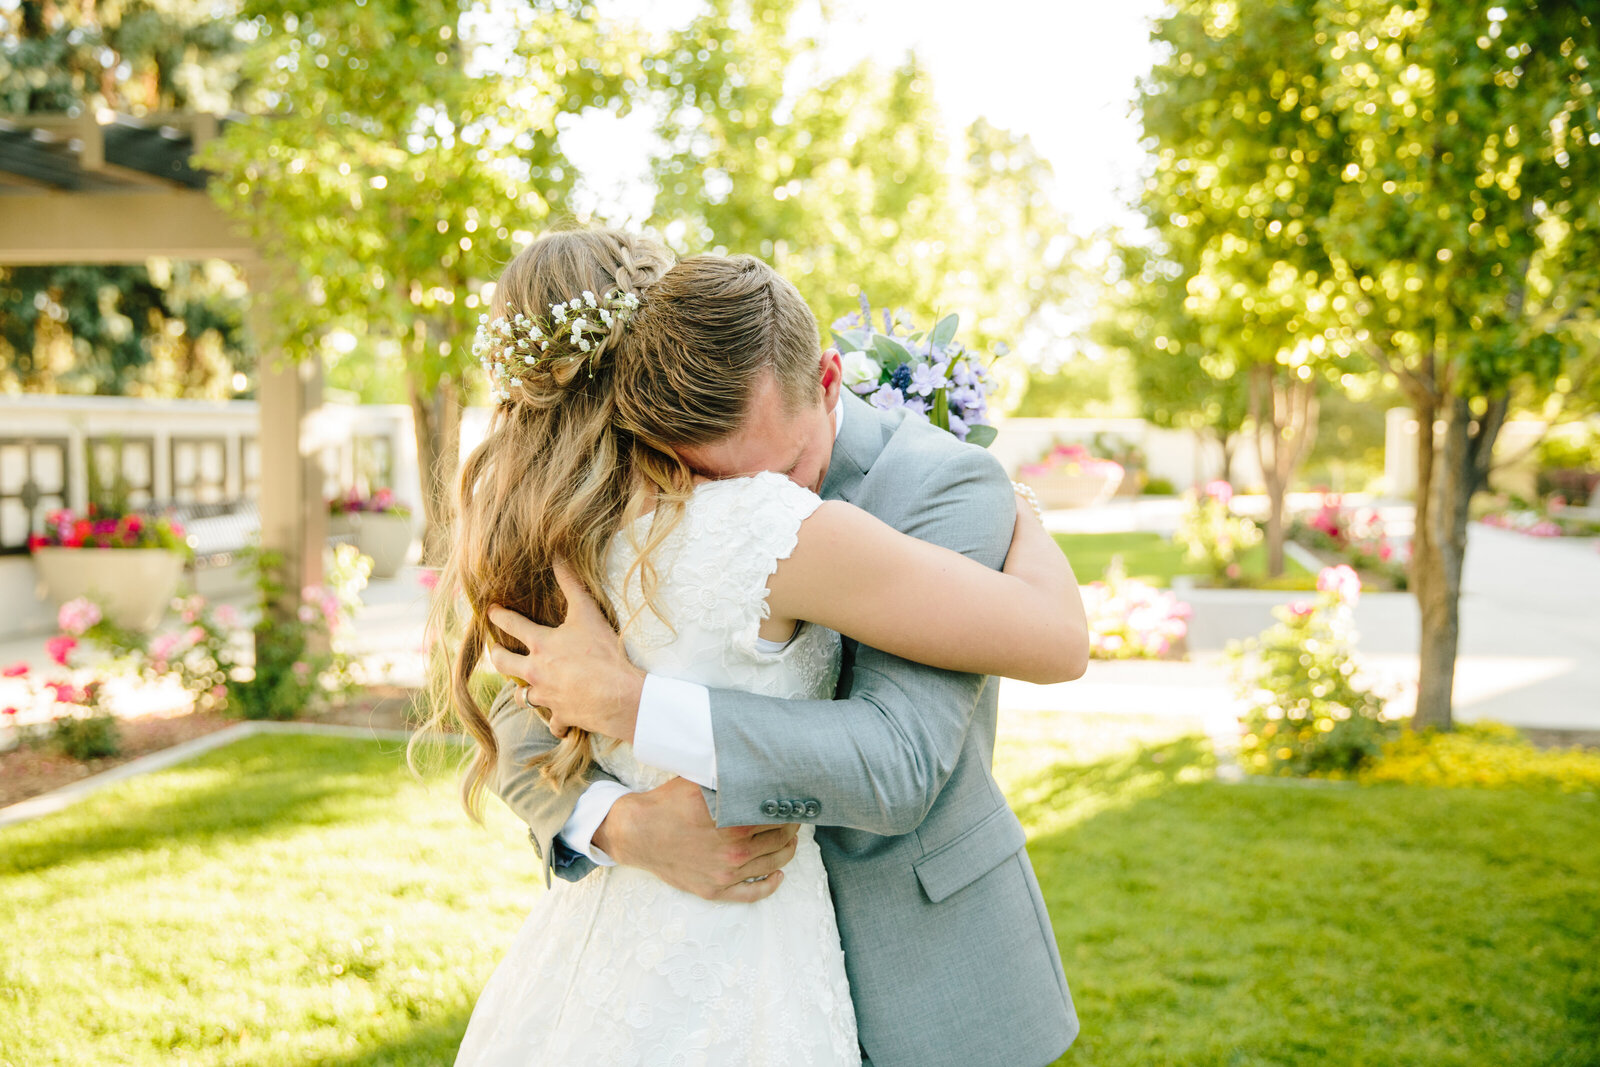 Jackson hole photographers capture bride and groom hugging after first look